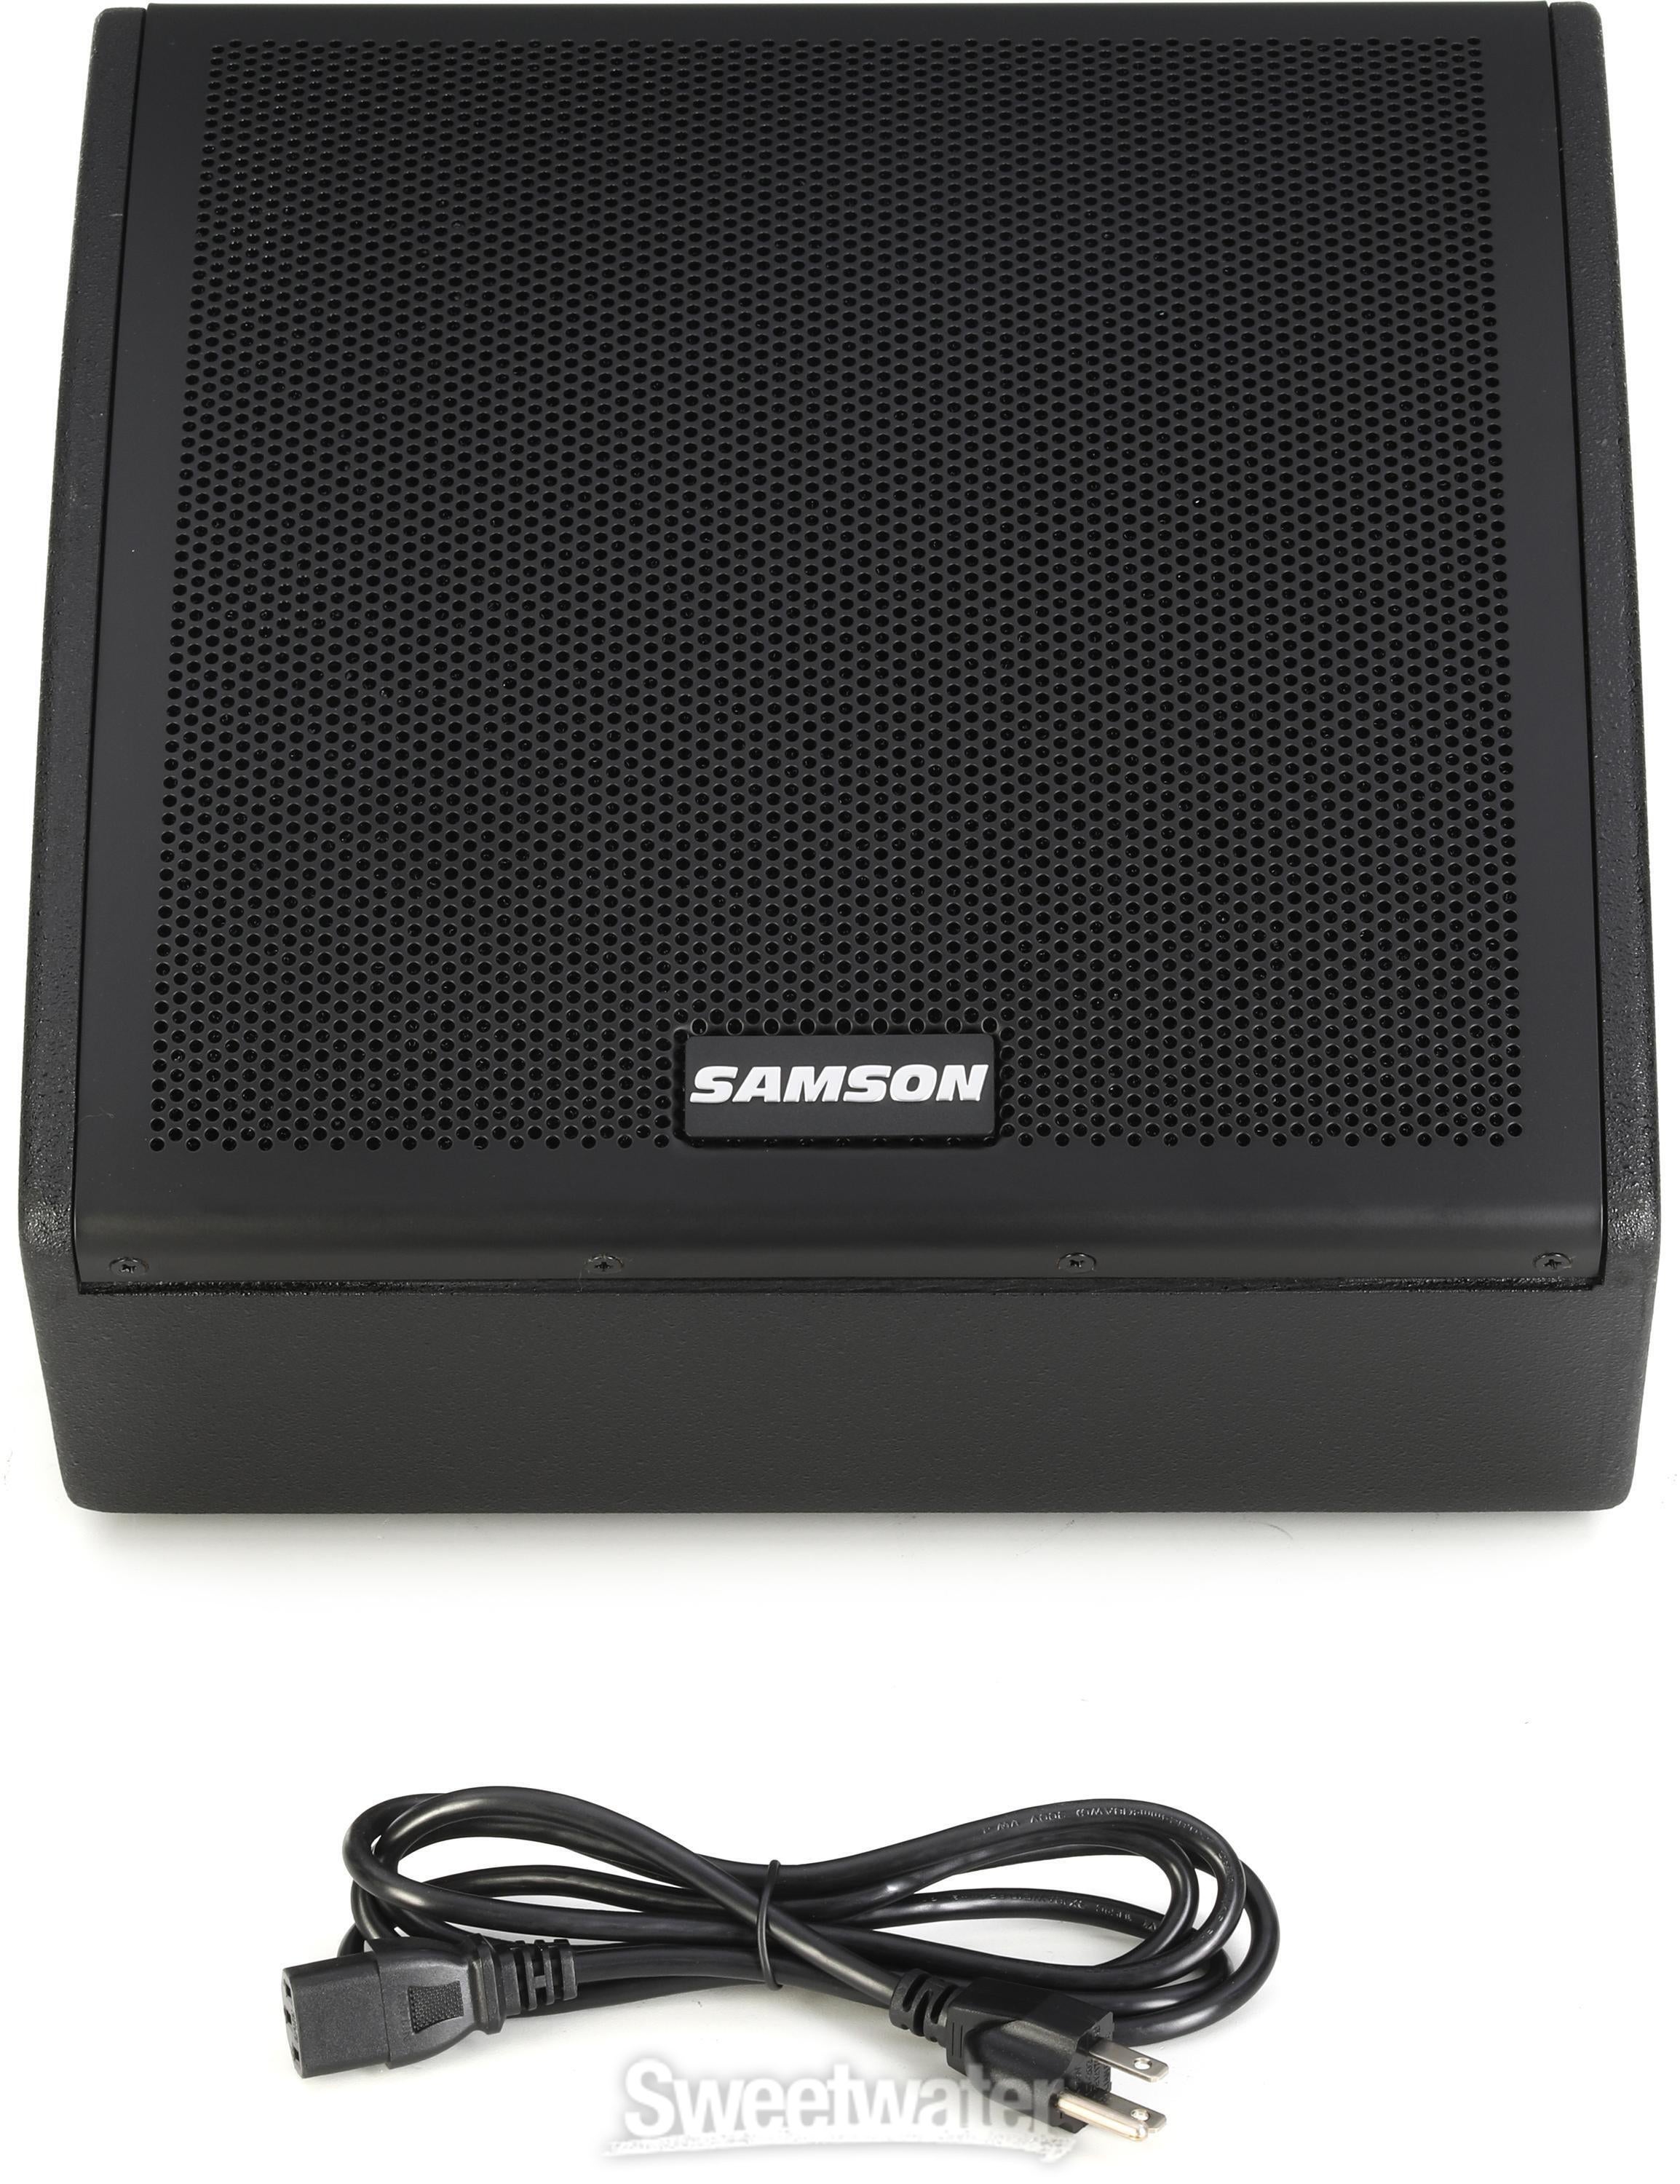 Samson RSXM10A 800W 10-inch Active Coaxial Stage Monitor | Sweetwater